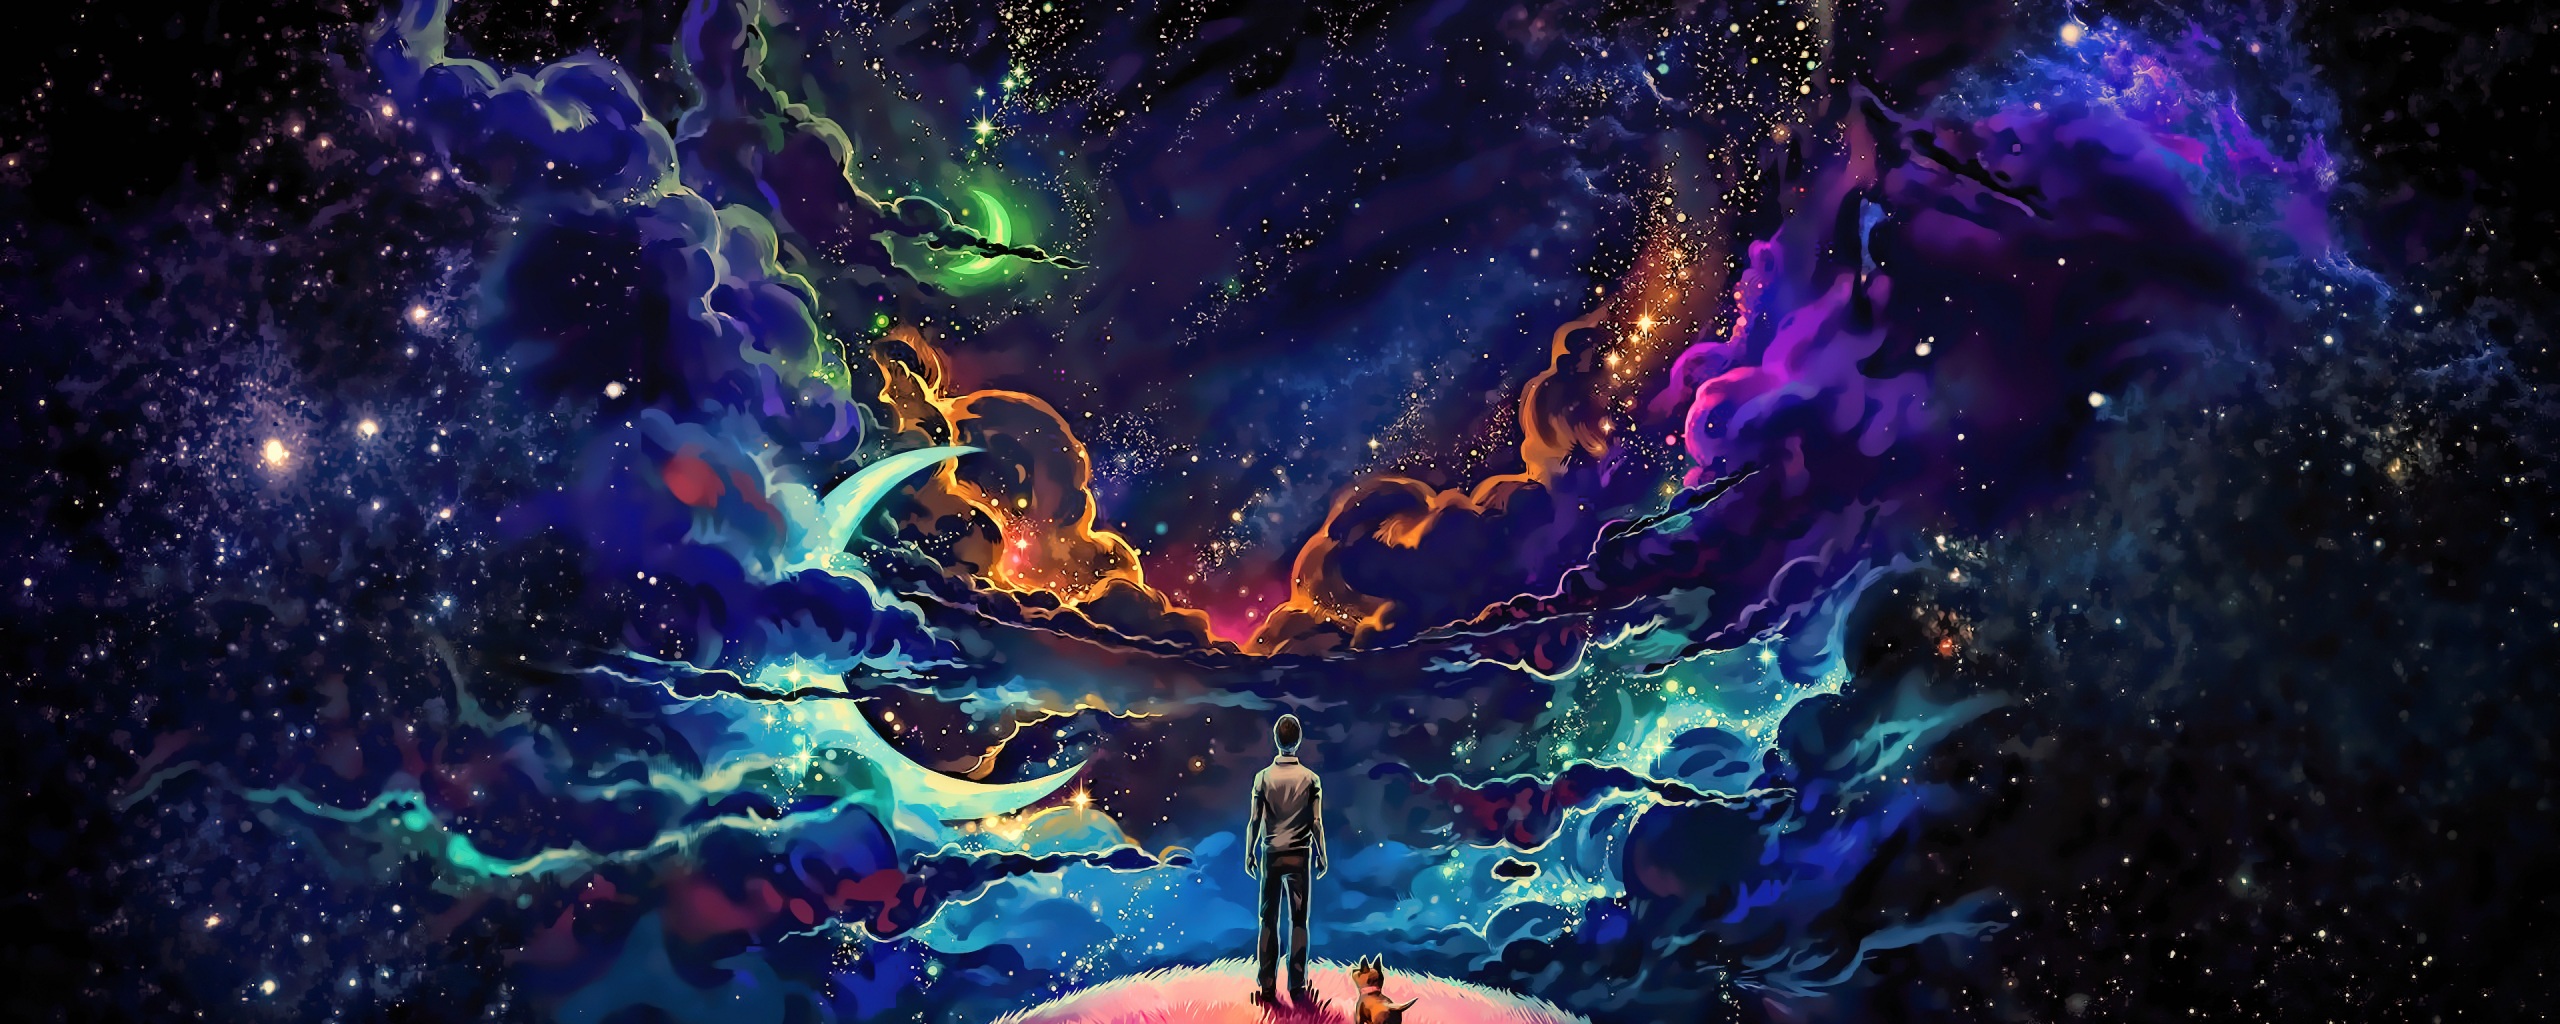 Wallpaper 4k Little Prince With Dog Colorful Science Fiction